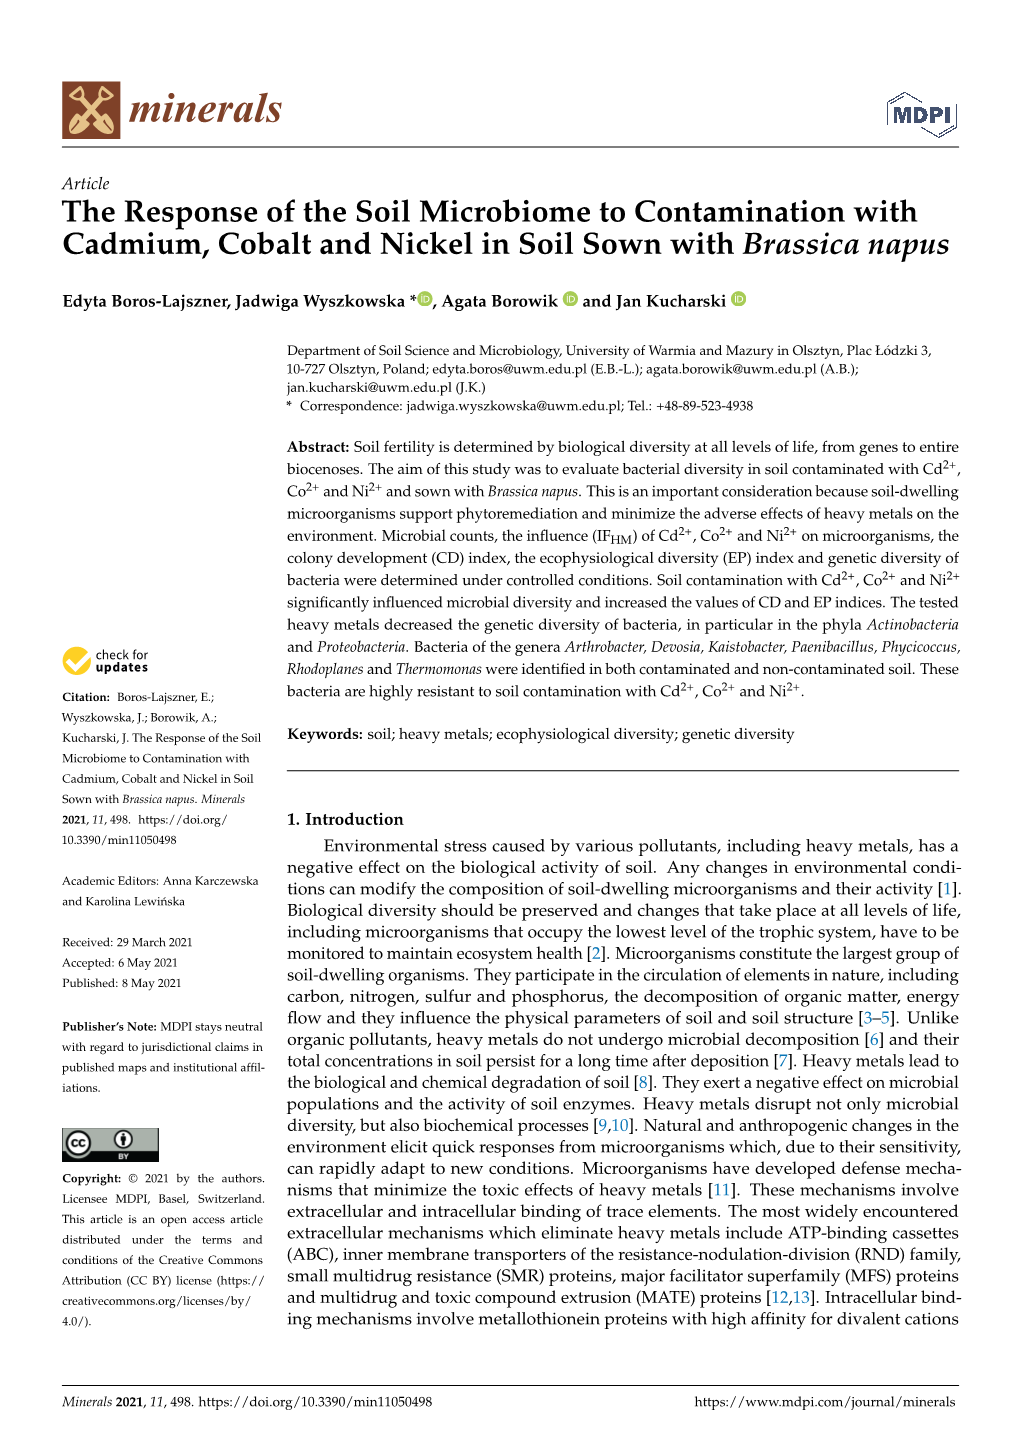 The Response of the Soil Microbiome to Contamination with Cadmium, Cobalt and Nickel in Soil Sown with Brassica Napus